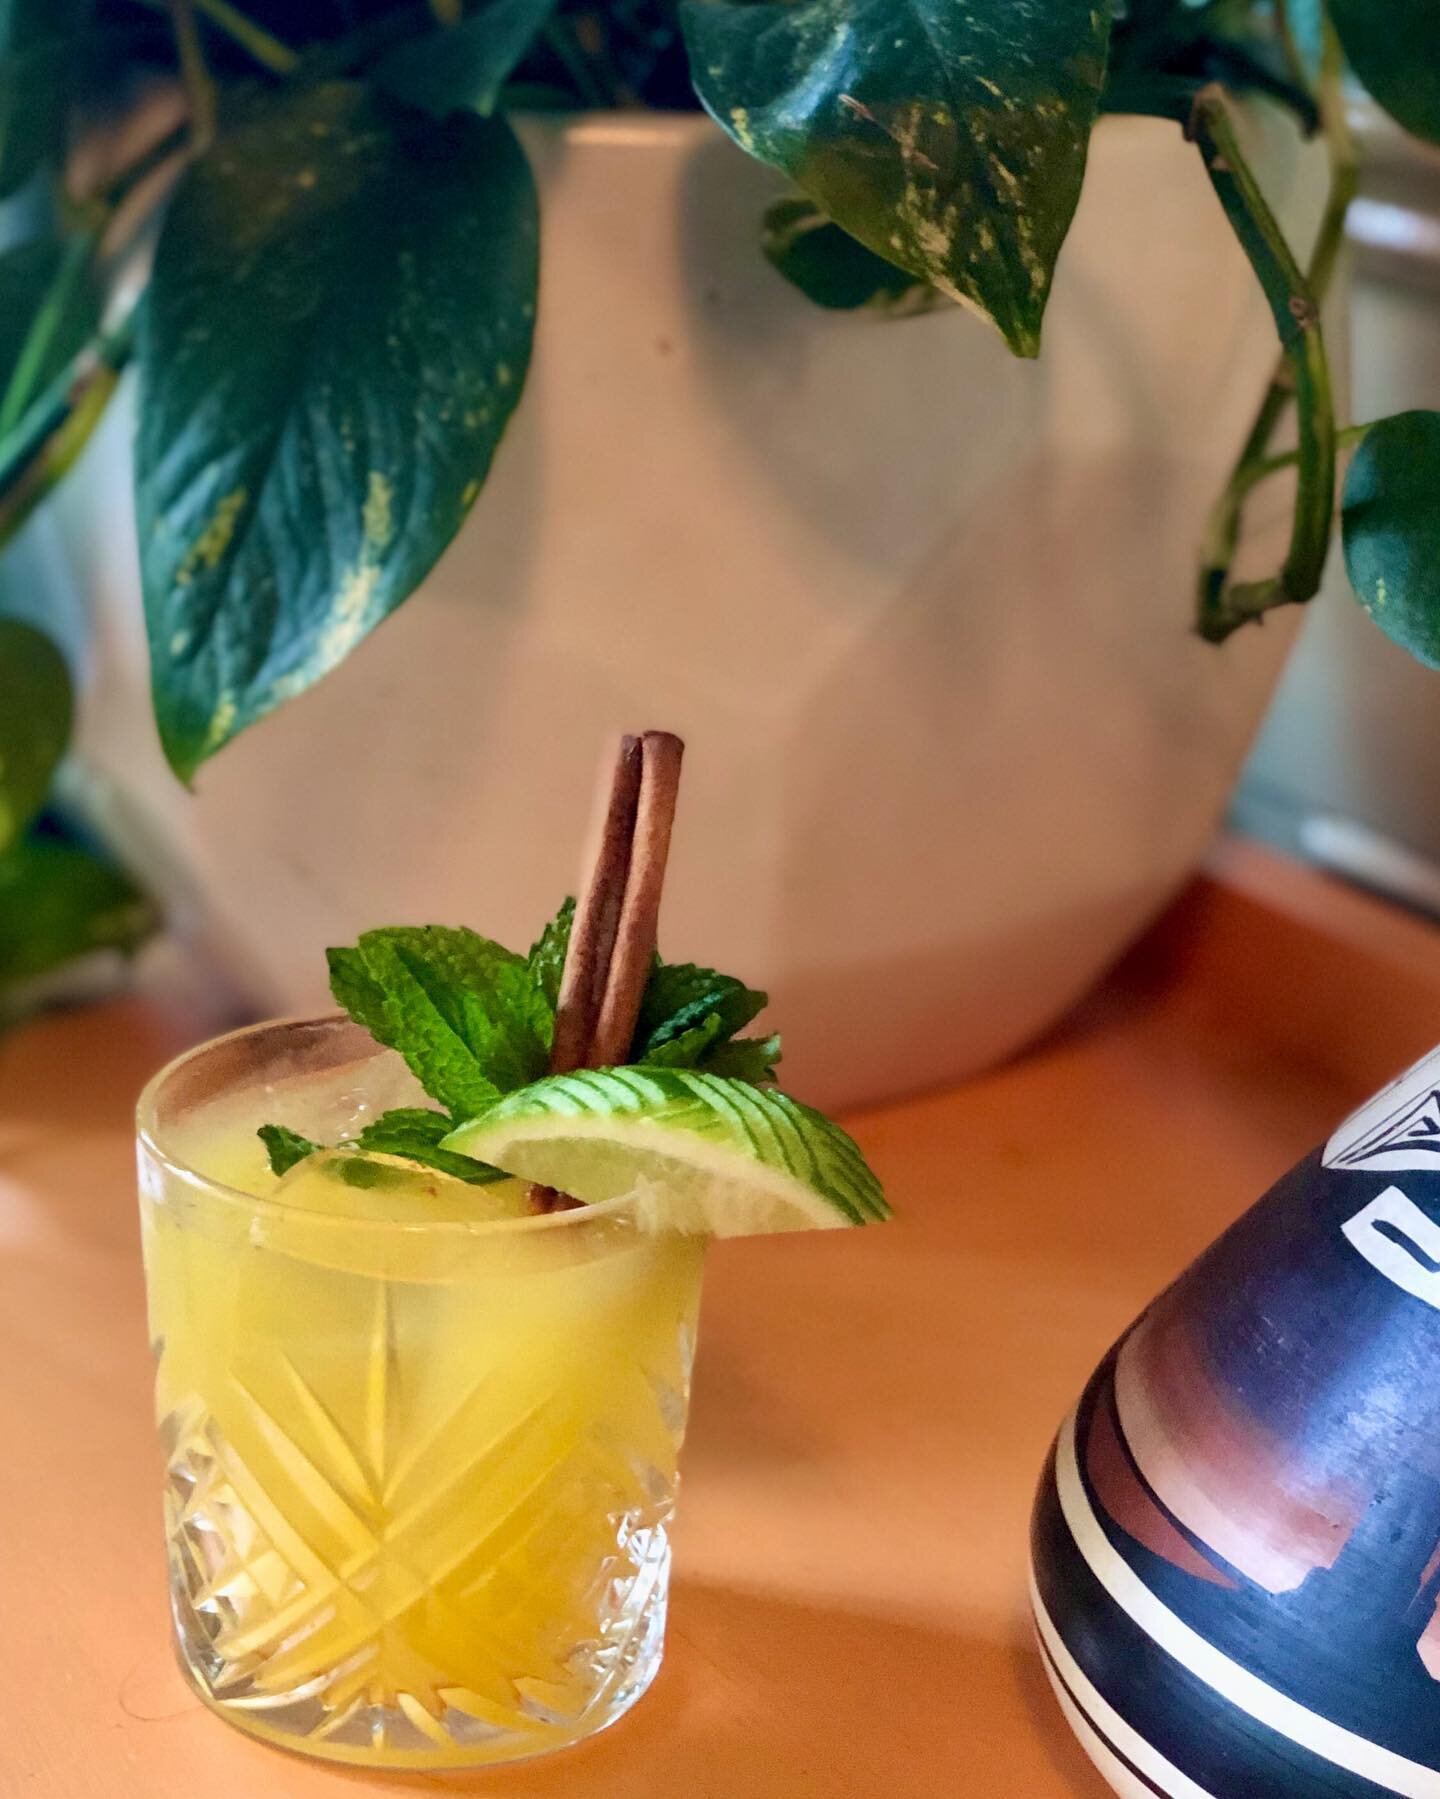 A little winter tiki cocktail for a vacation in a glass. Tiki in Kentucky with mint, passion fruit, cinnamon, Four Roses bourbon, Hamilton petite shrubb and lime. 🏖 
.
.
.
#cocktails #tiki #fourroses #draaaaanks #foodandwine #imbibegram #punchdrink 